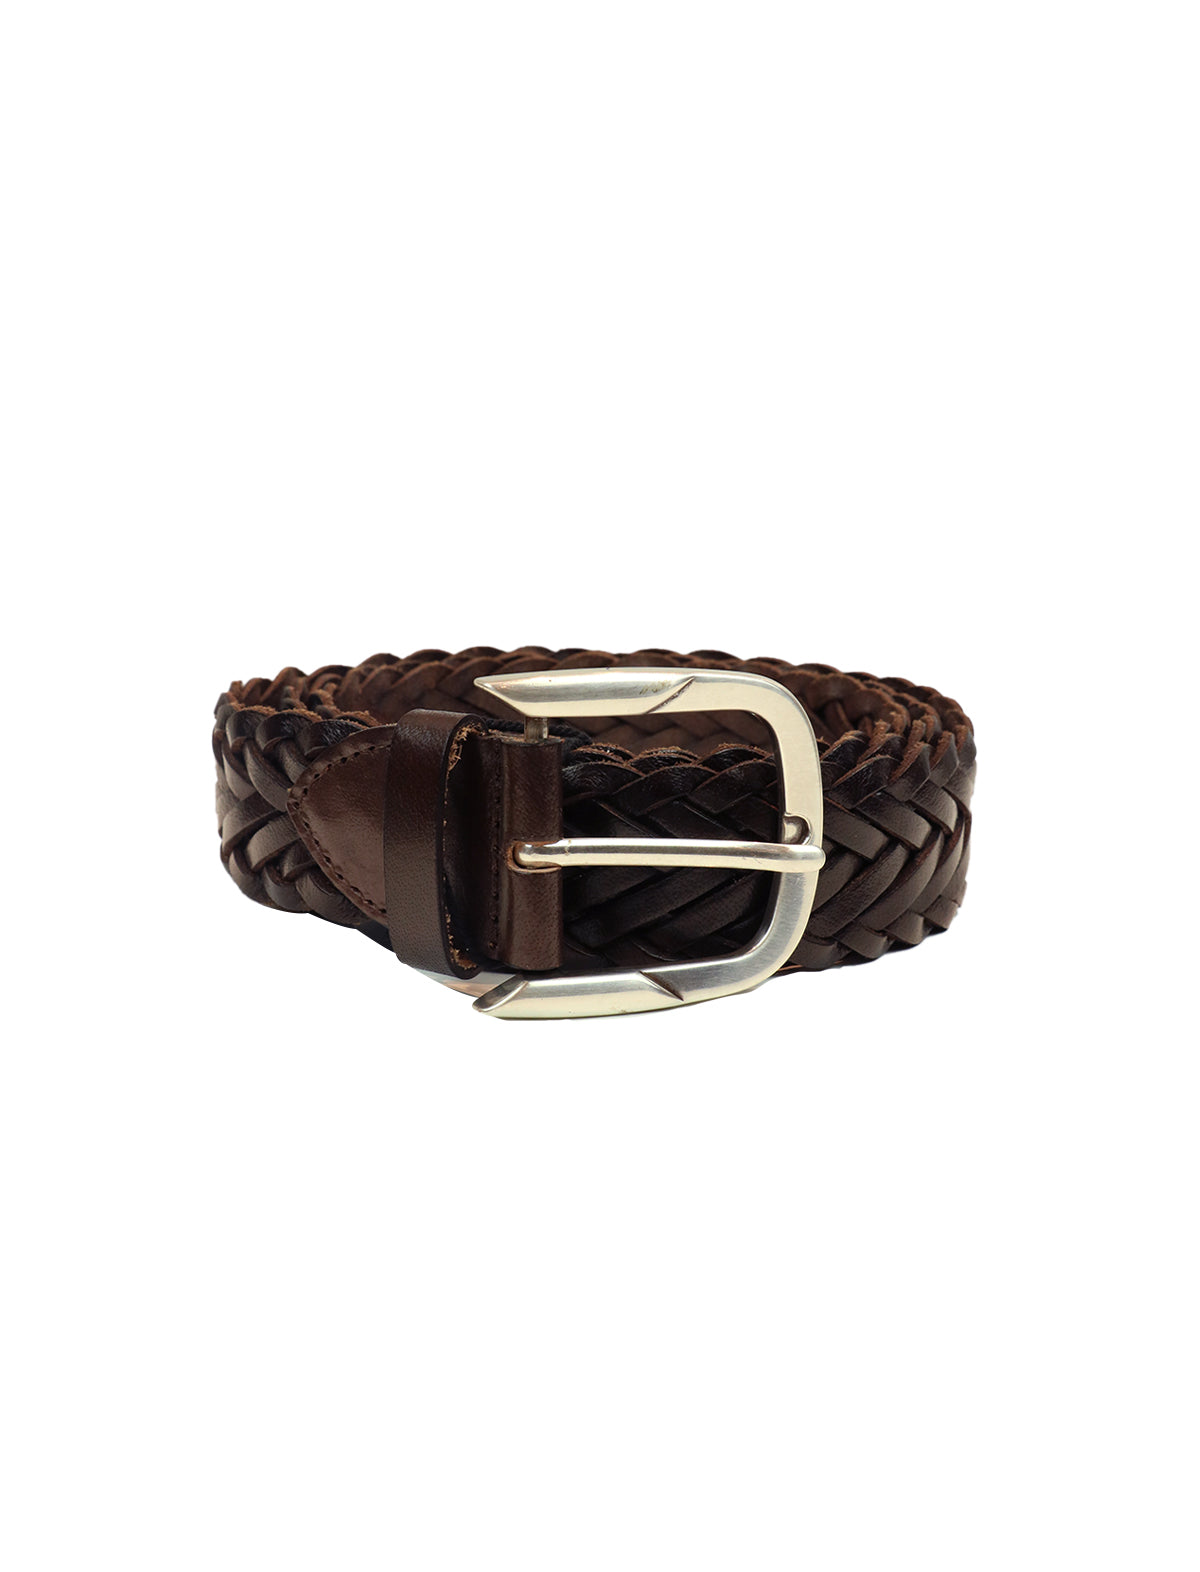 Andrea d'Amico Braided Leather Belt in Brown